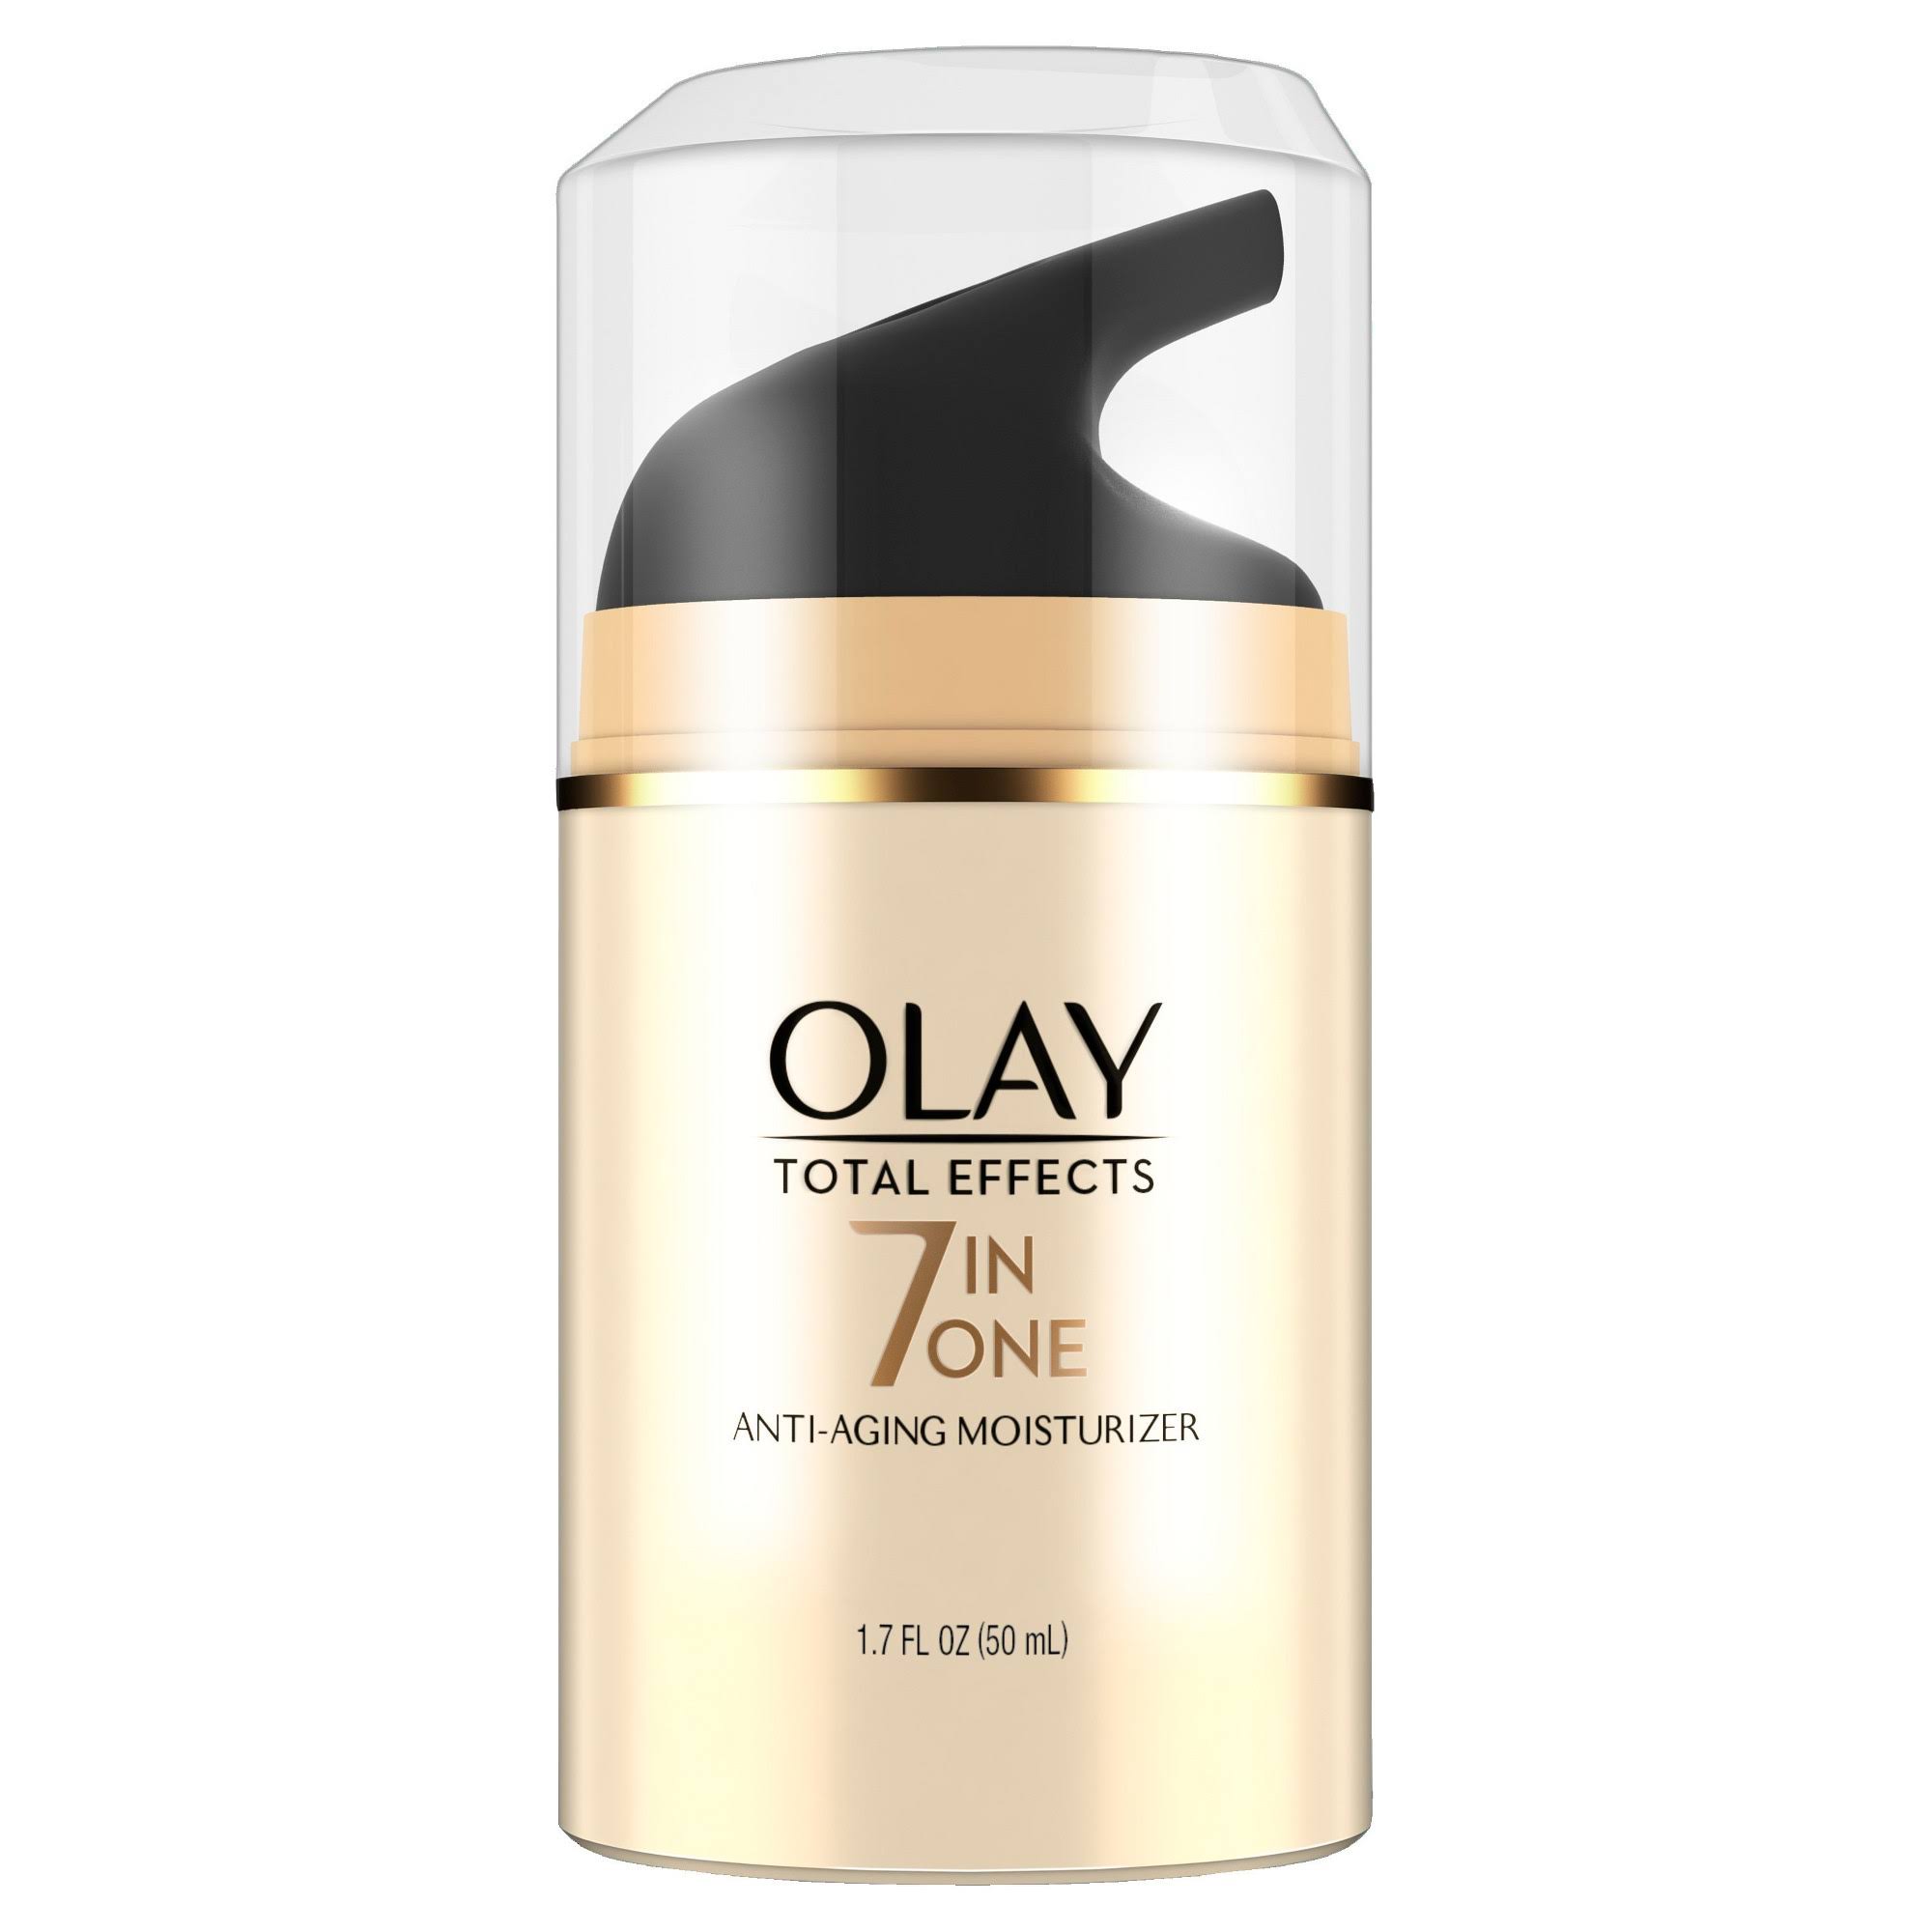 Olay Total Effects 7-In-1 Anti-Aging Daily Moisturizer - 1.7oz